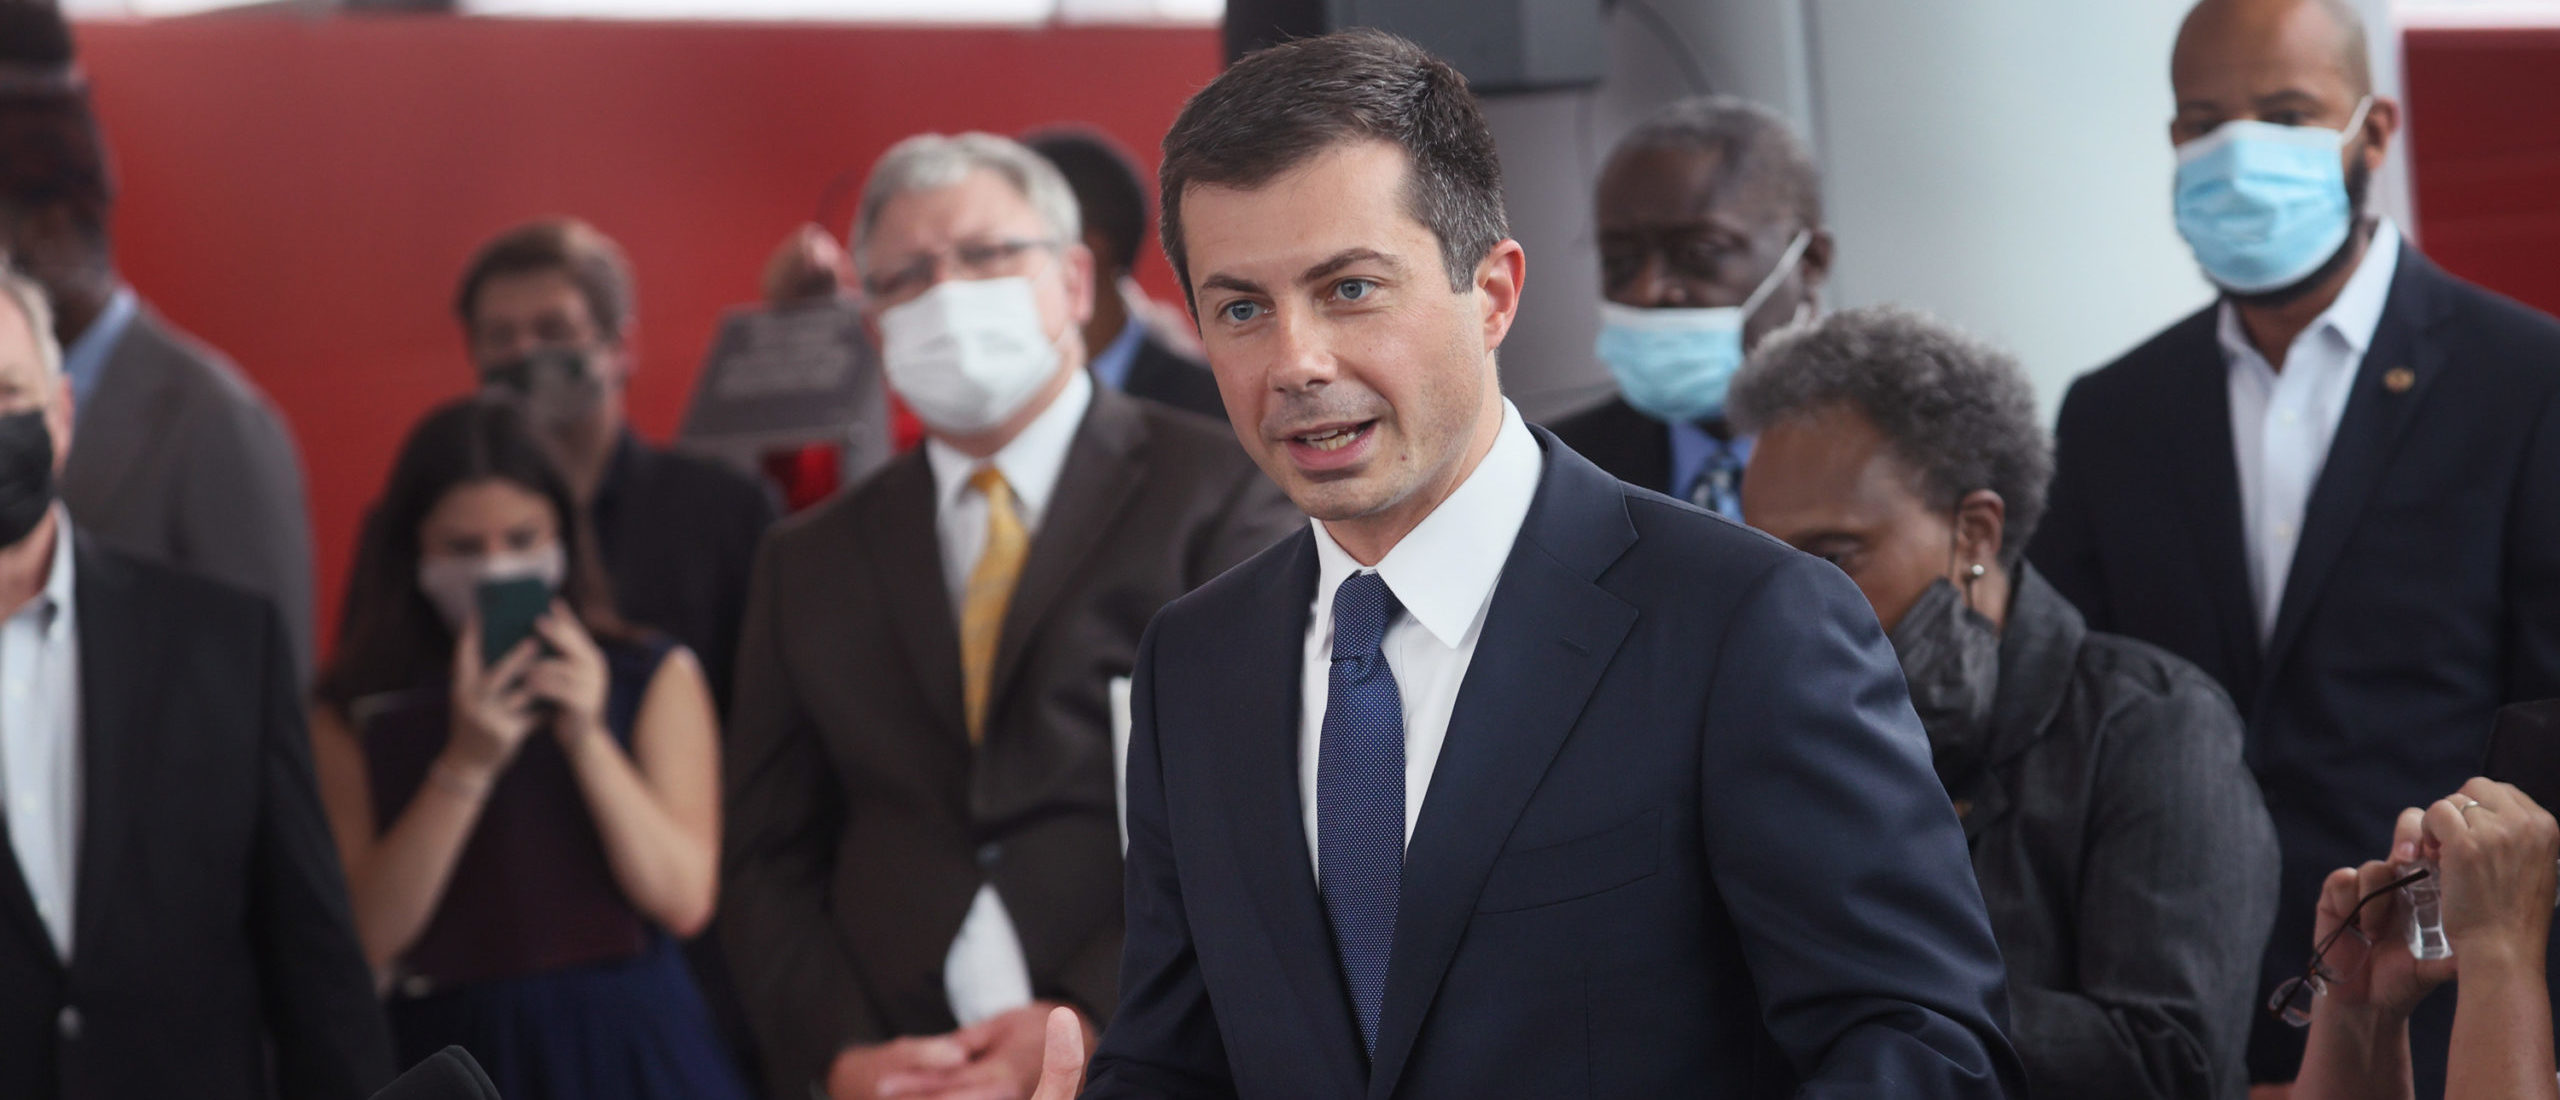 Transportation Secretary Pete Buttigieg holds a press conference on July 16 in Chicago, Illinois. (Scott Olson/Getty Images)